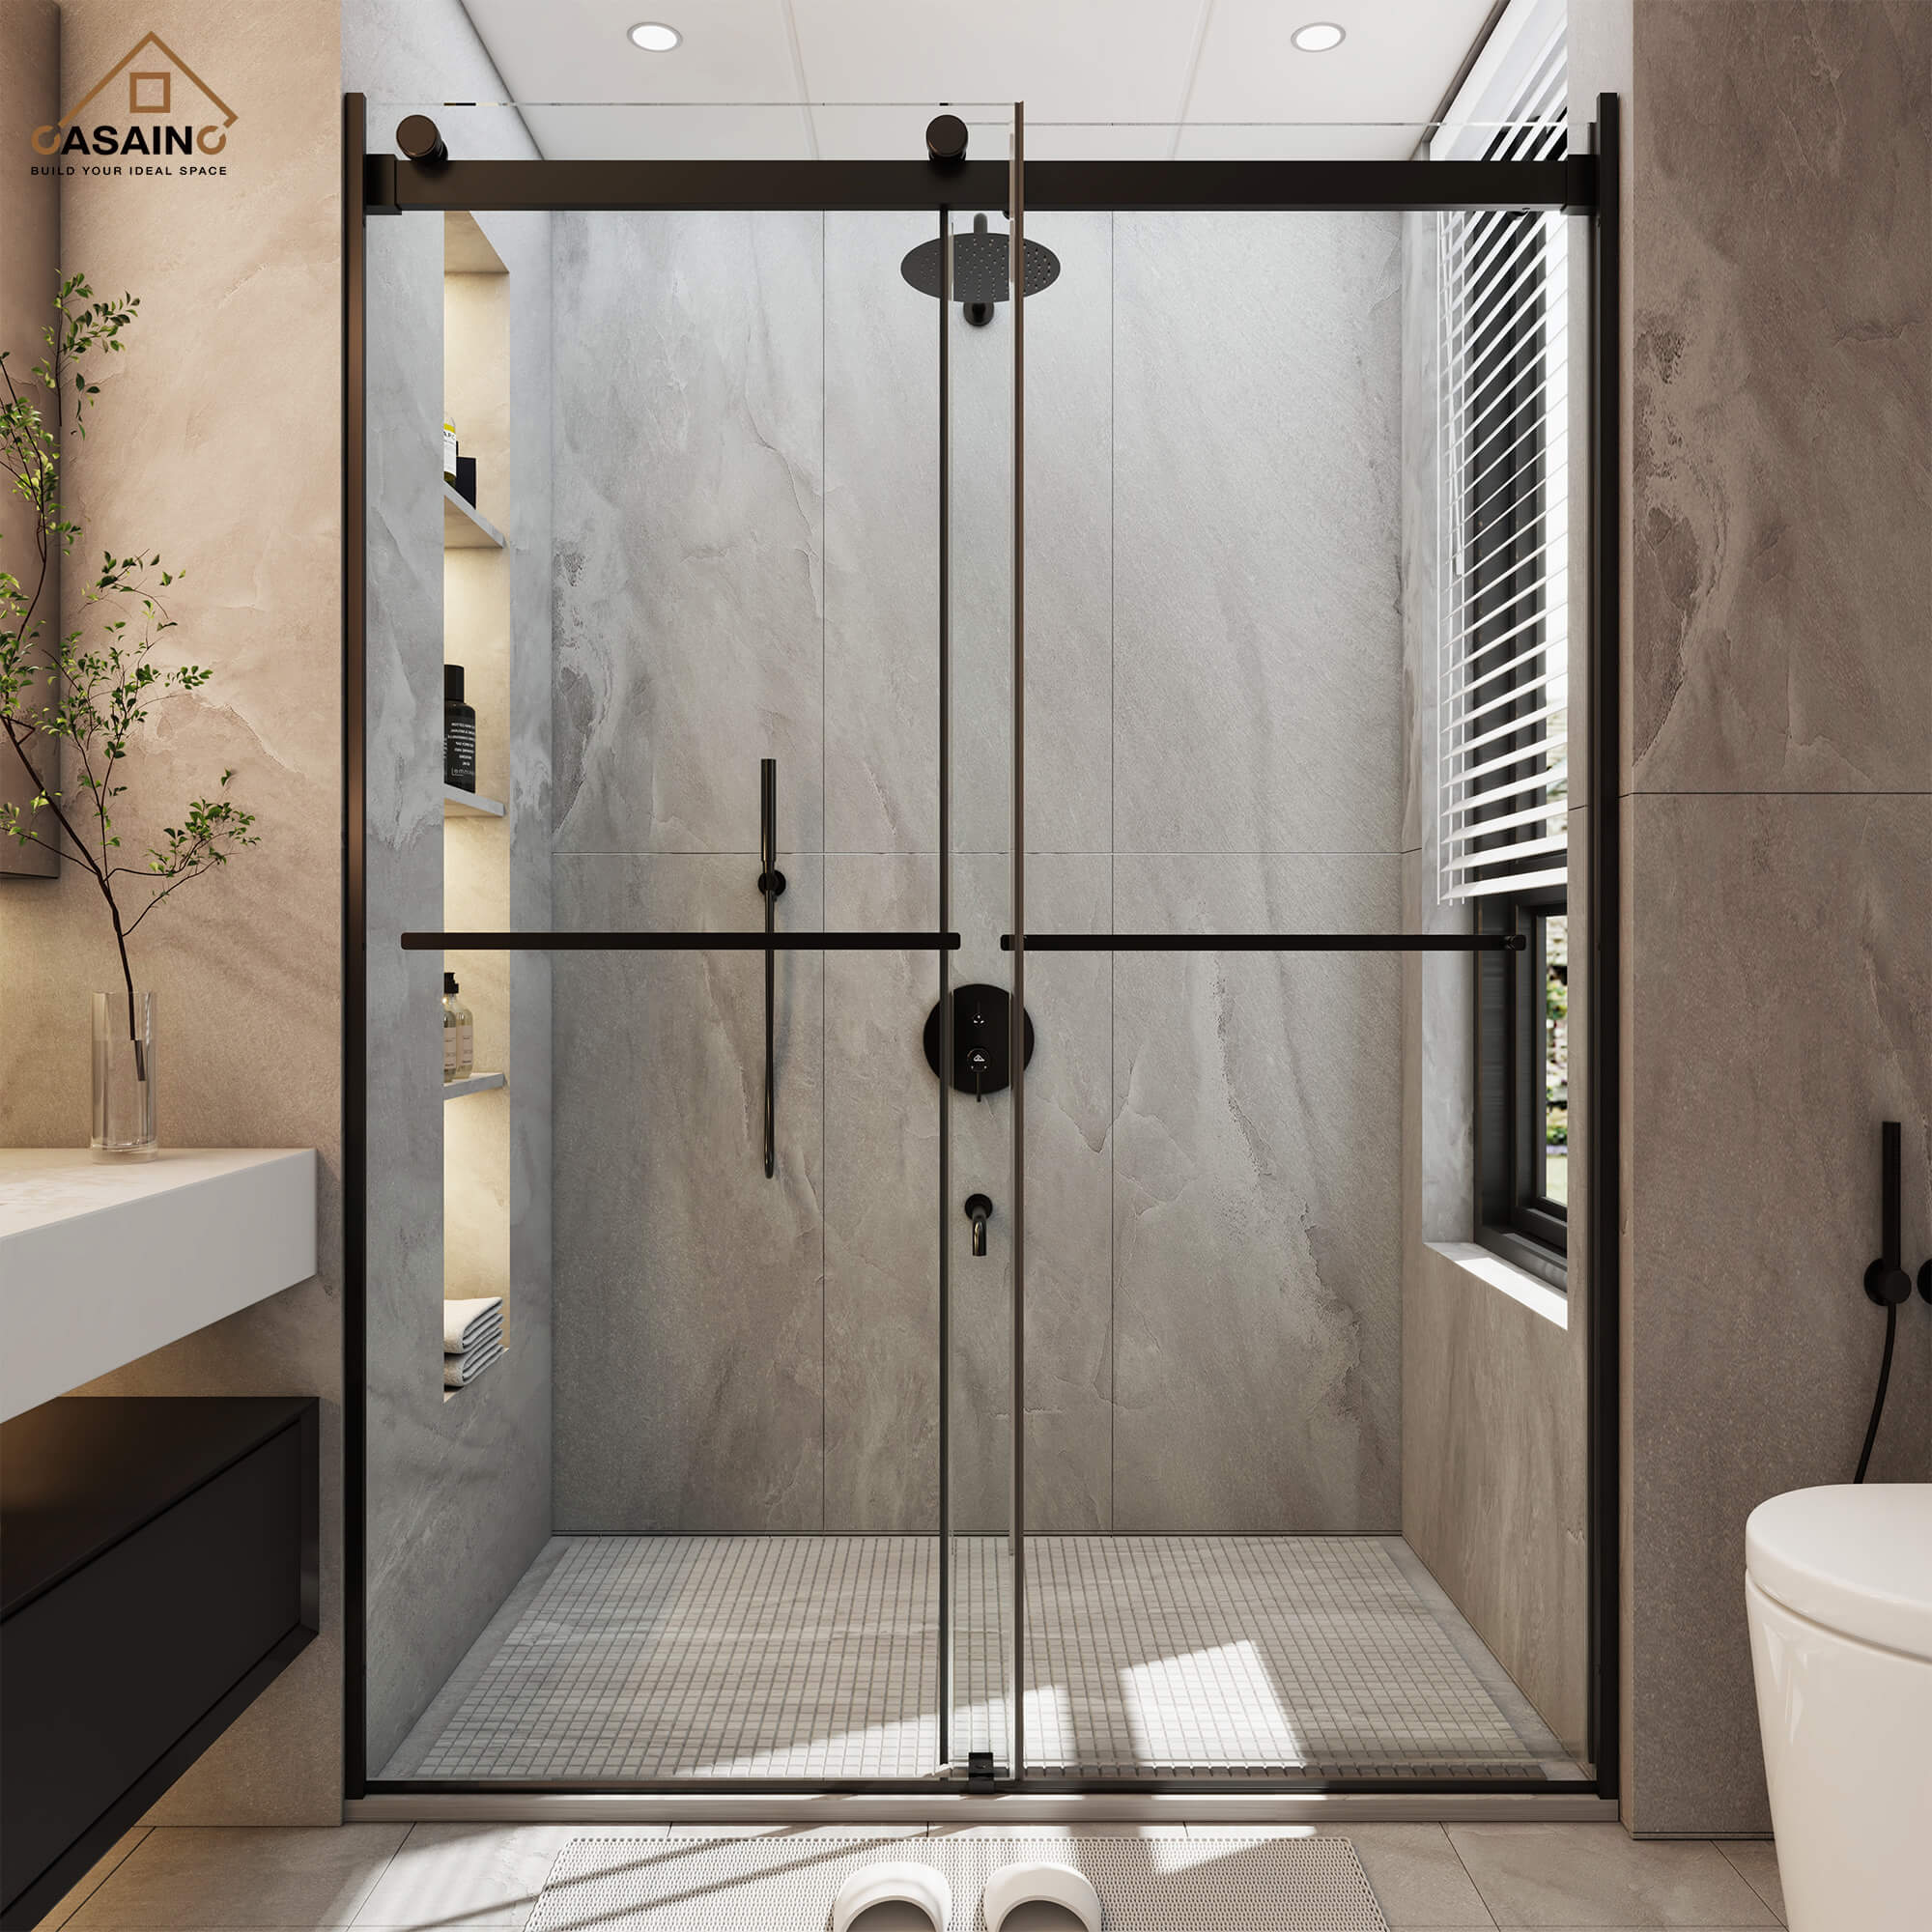 What's a Seamless Shower? This Airy Bathroom Trend Is More Popular